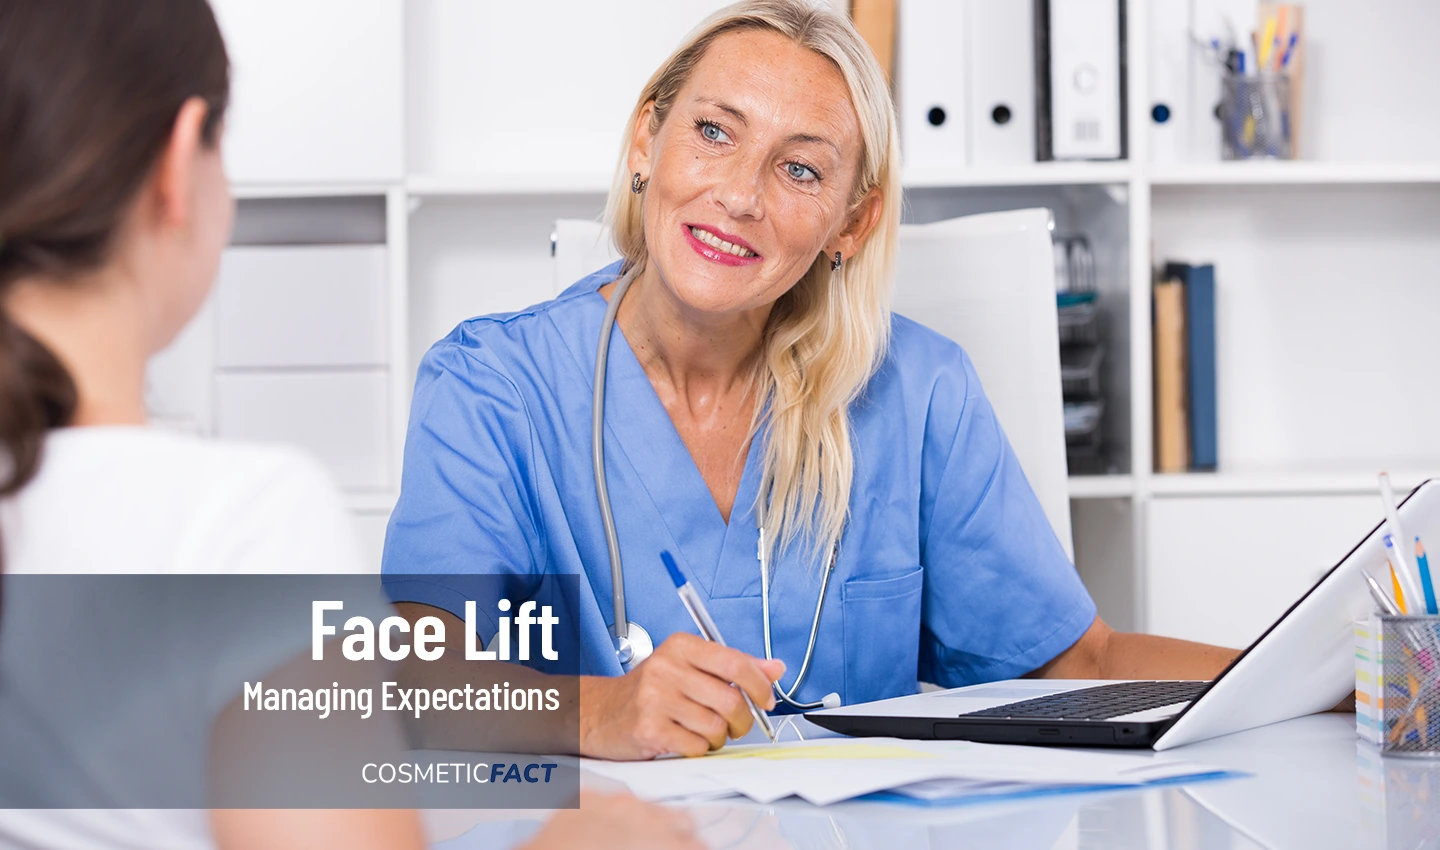 Image of a female plastic surgeon listening to a patient's facelift surgery goals.